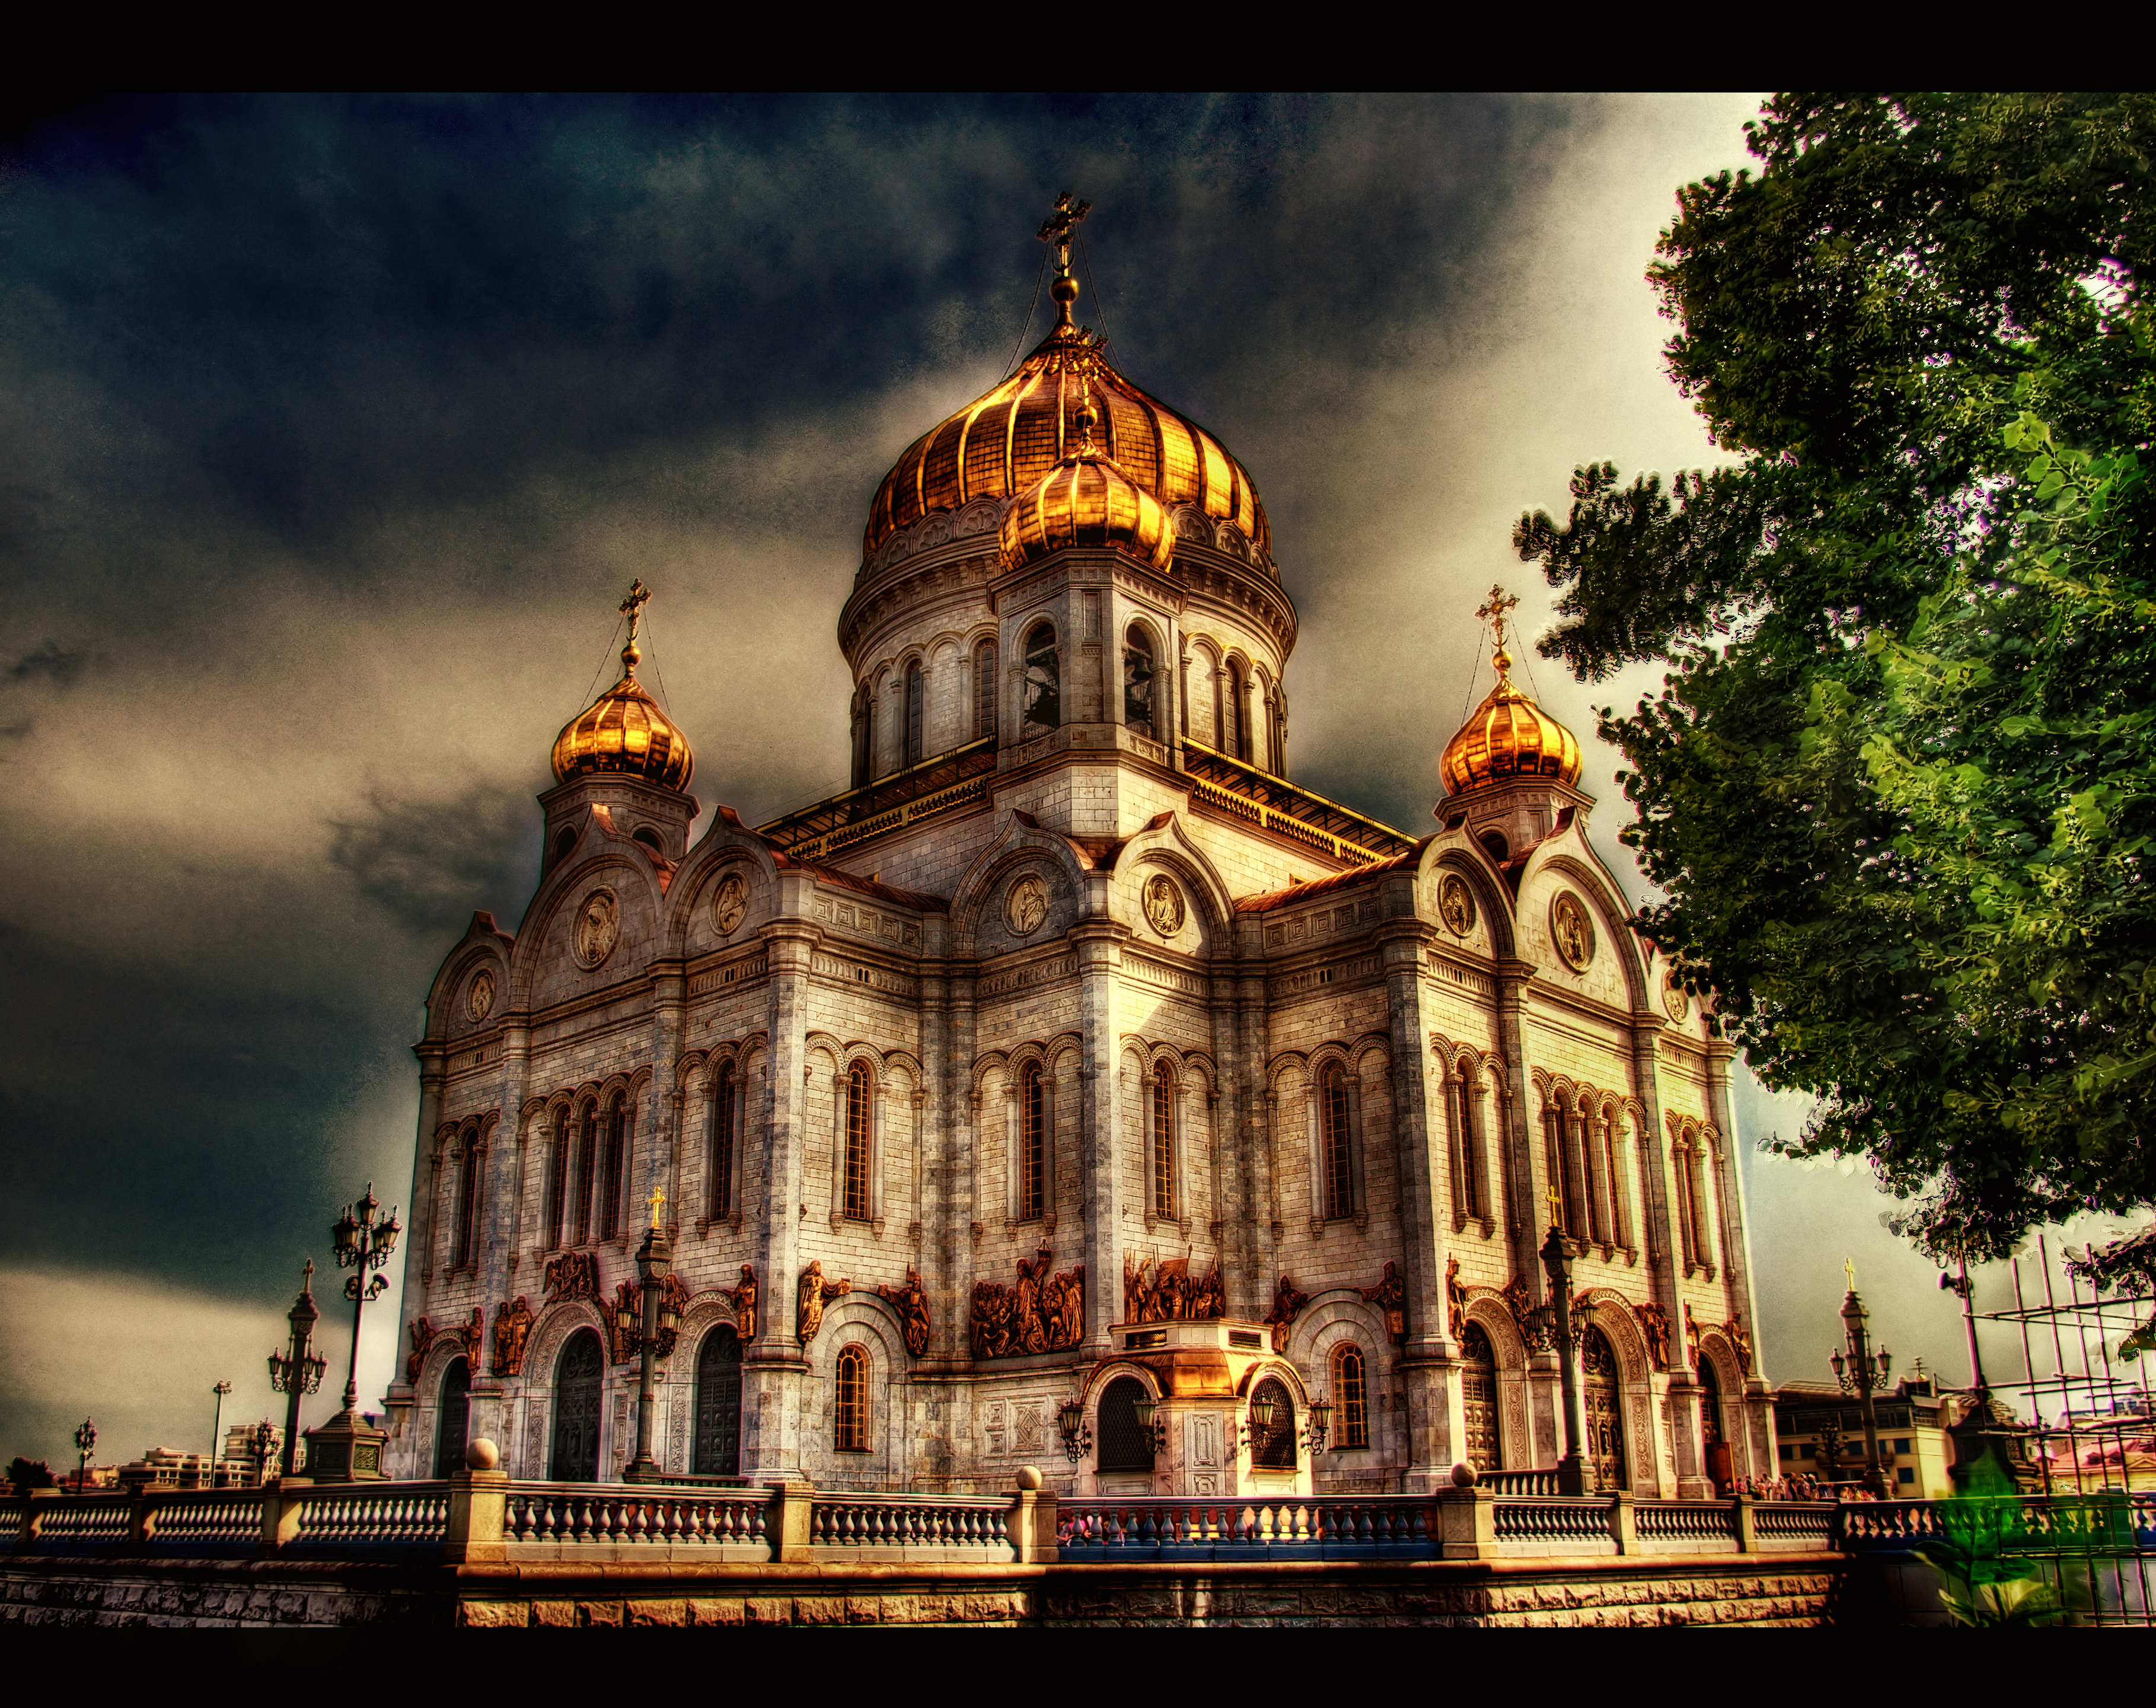 architecture, churches, Moscow, HDR photography - desktop wallpaper